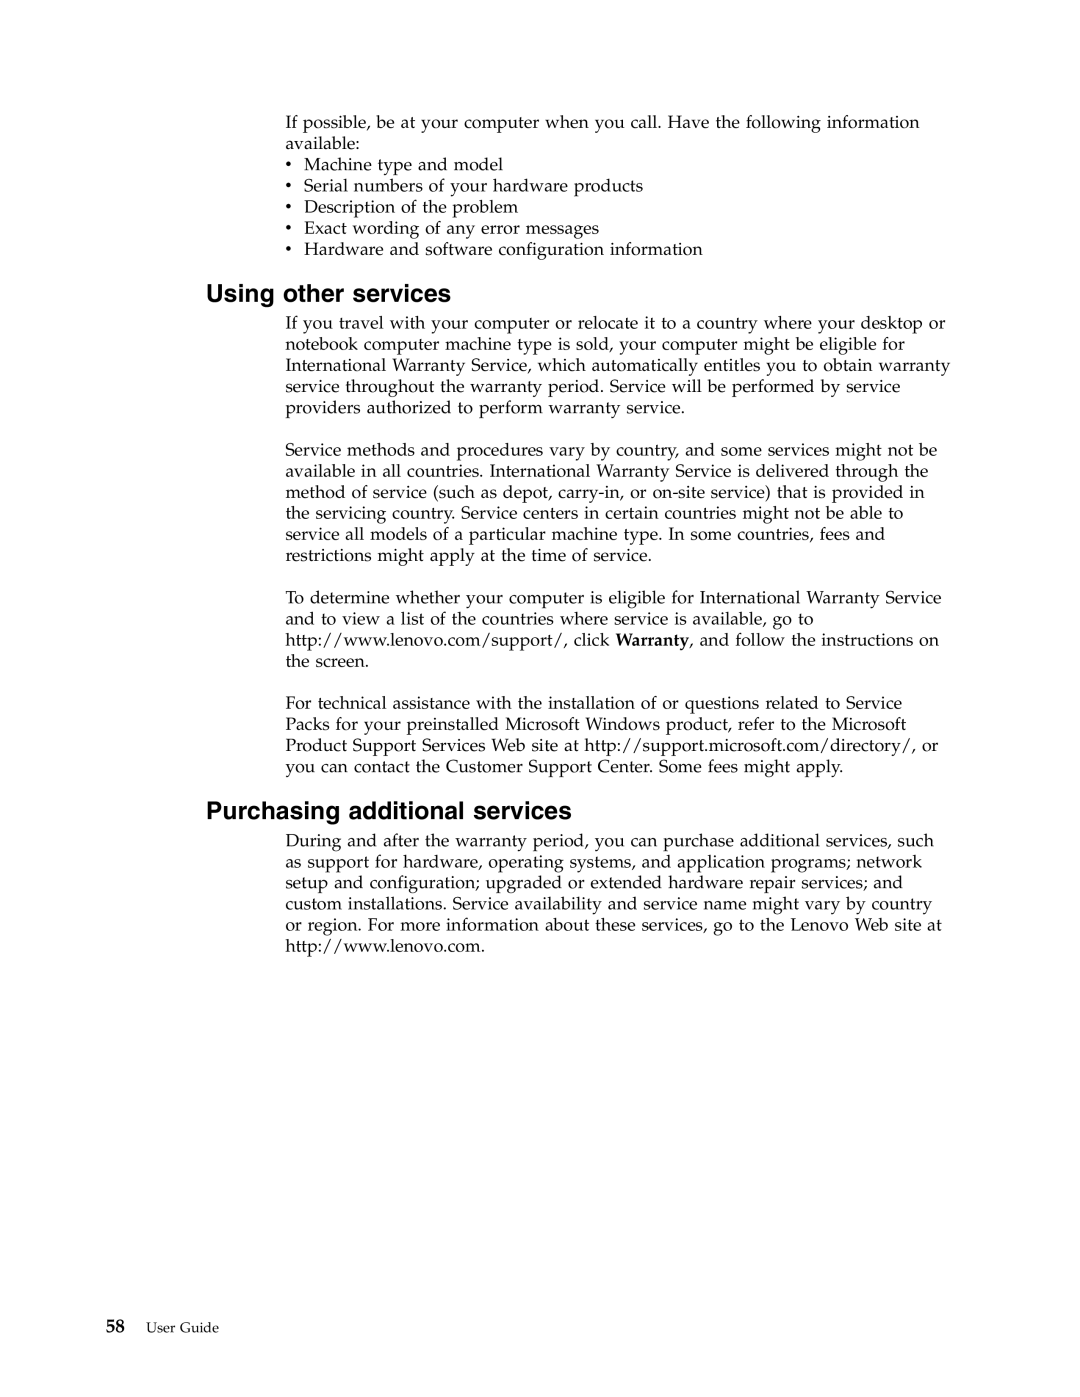 Lenovo 6019 manual Using other services, Purchasing additional services 